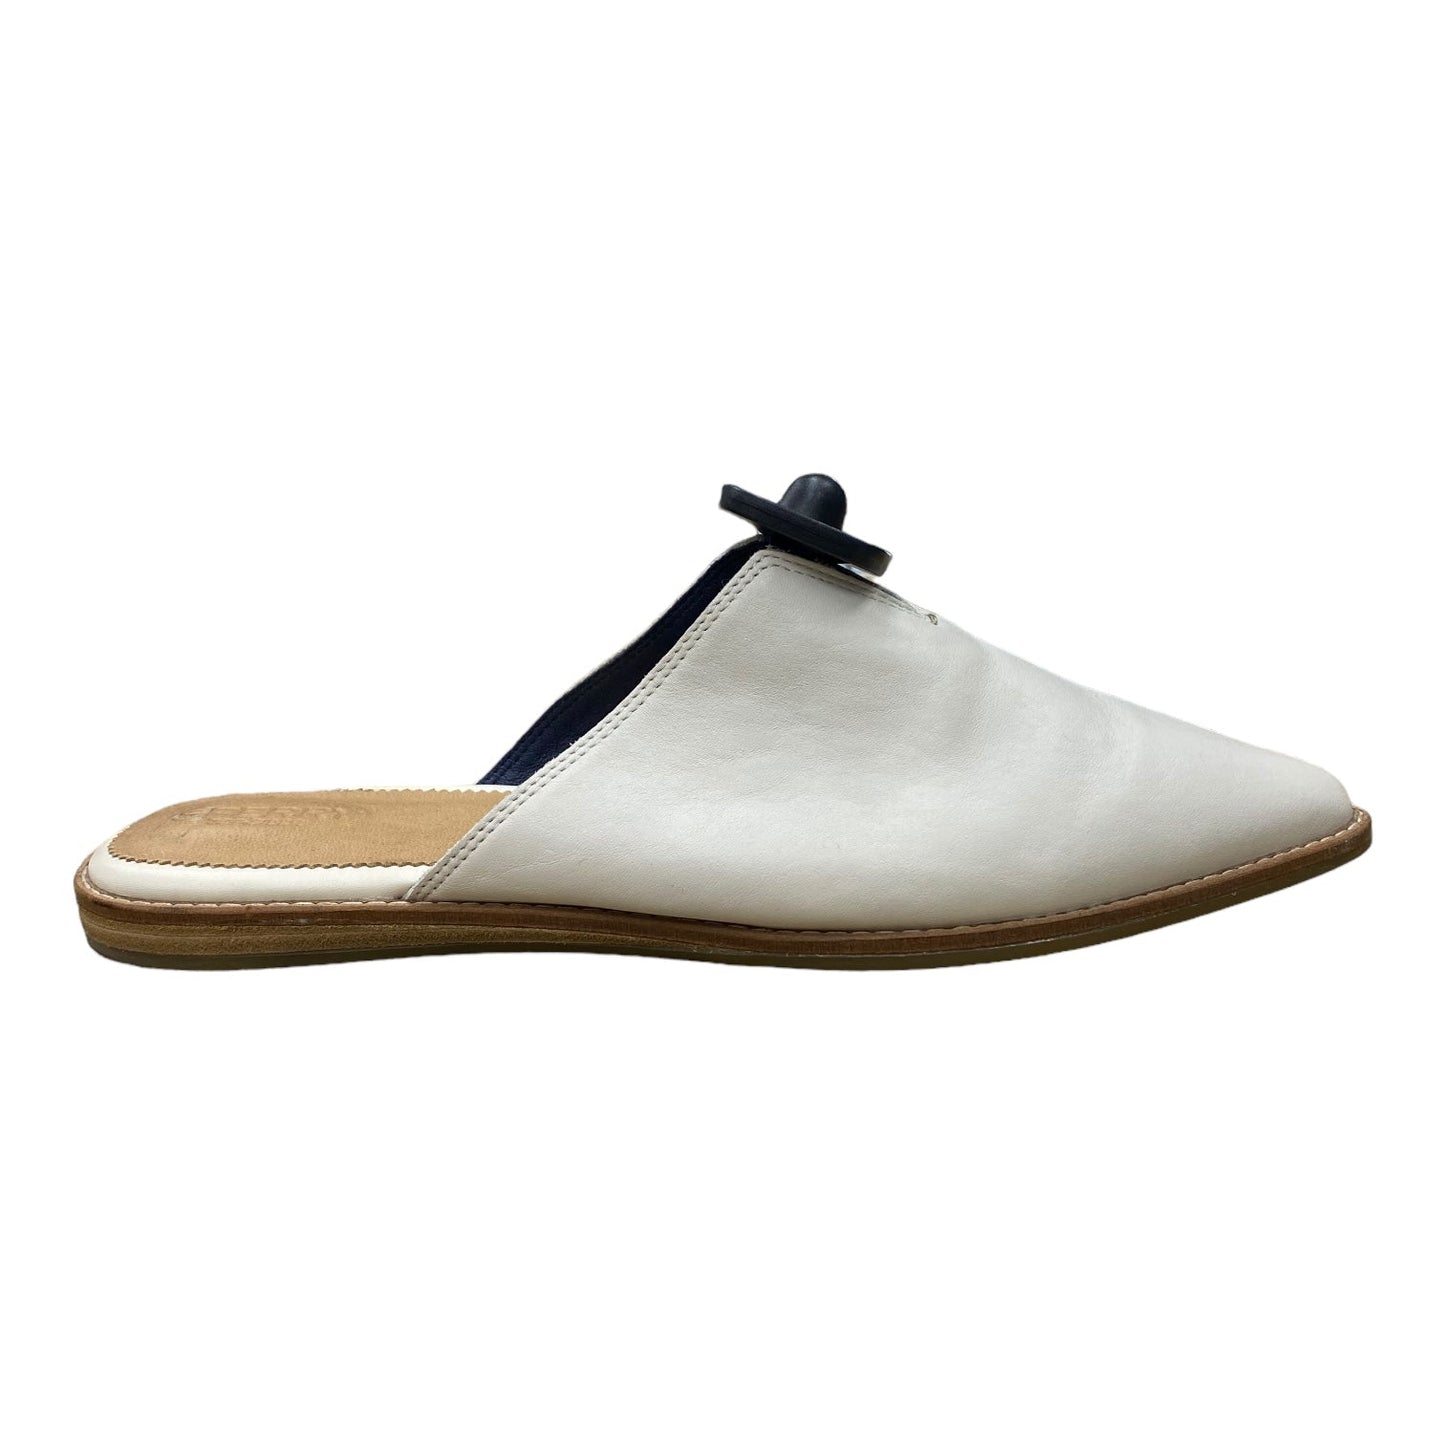 White Shoes Flats Sperry, Size 11